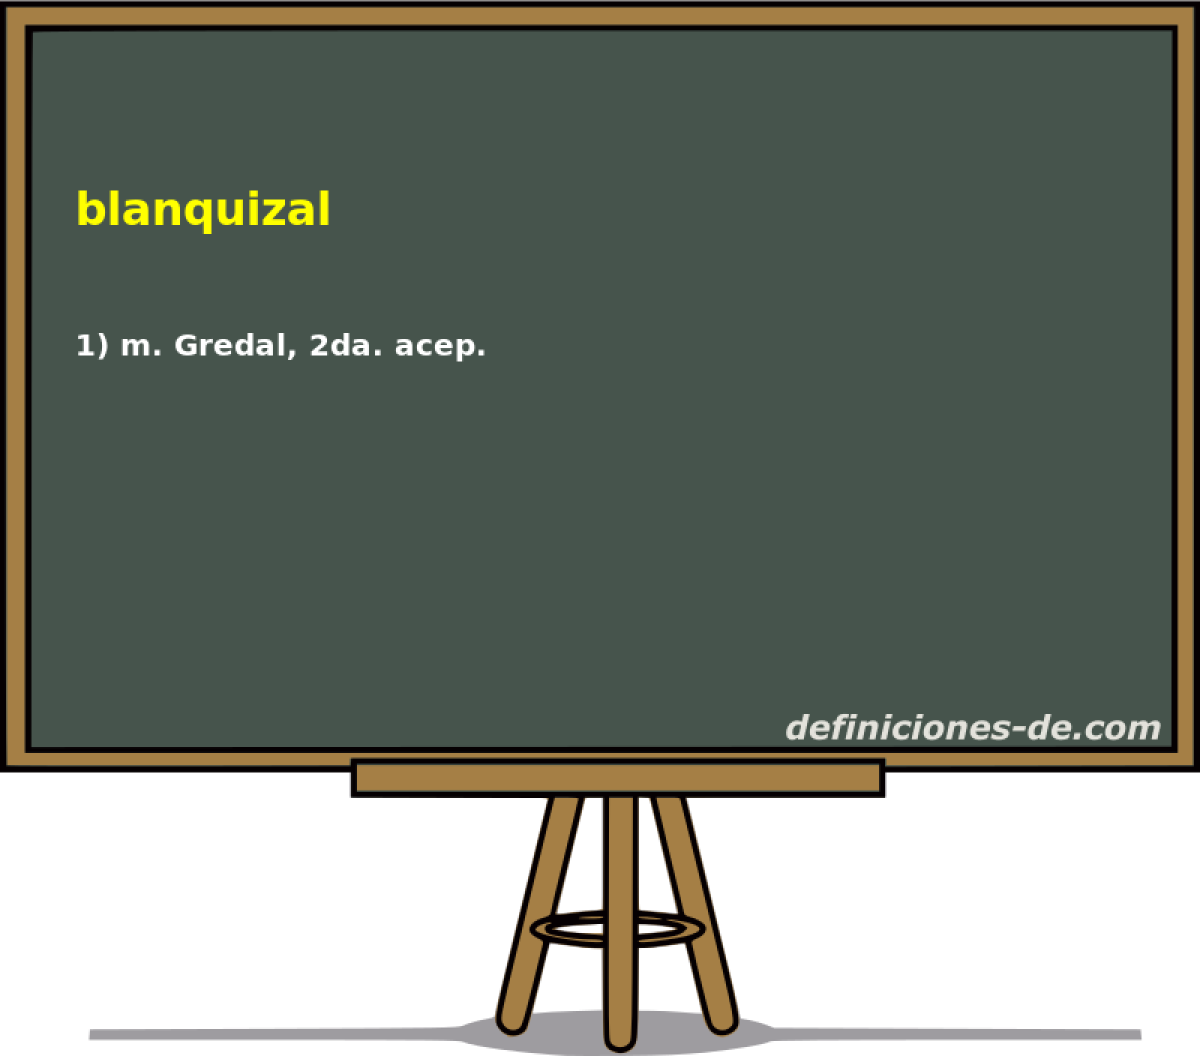 blanquizal 